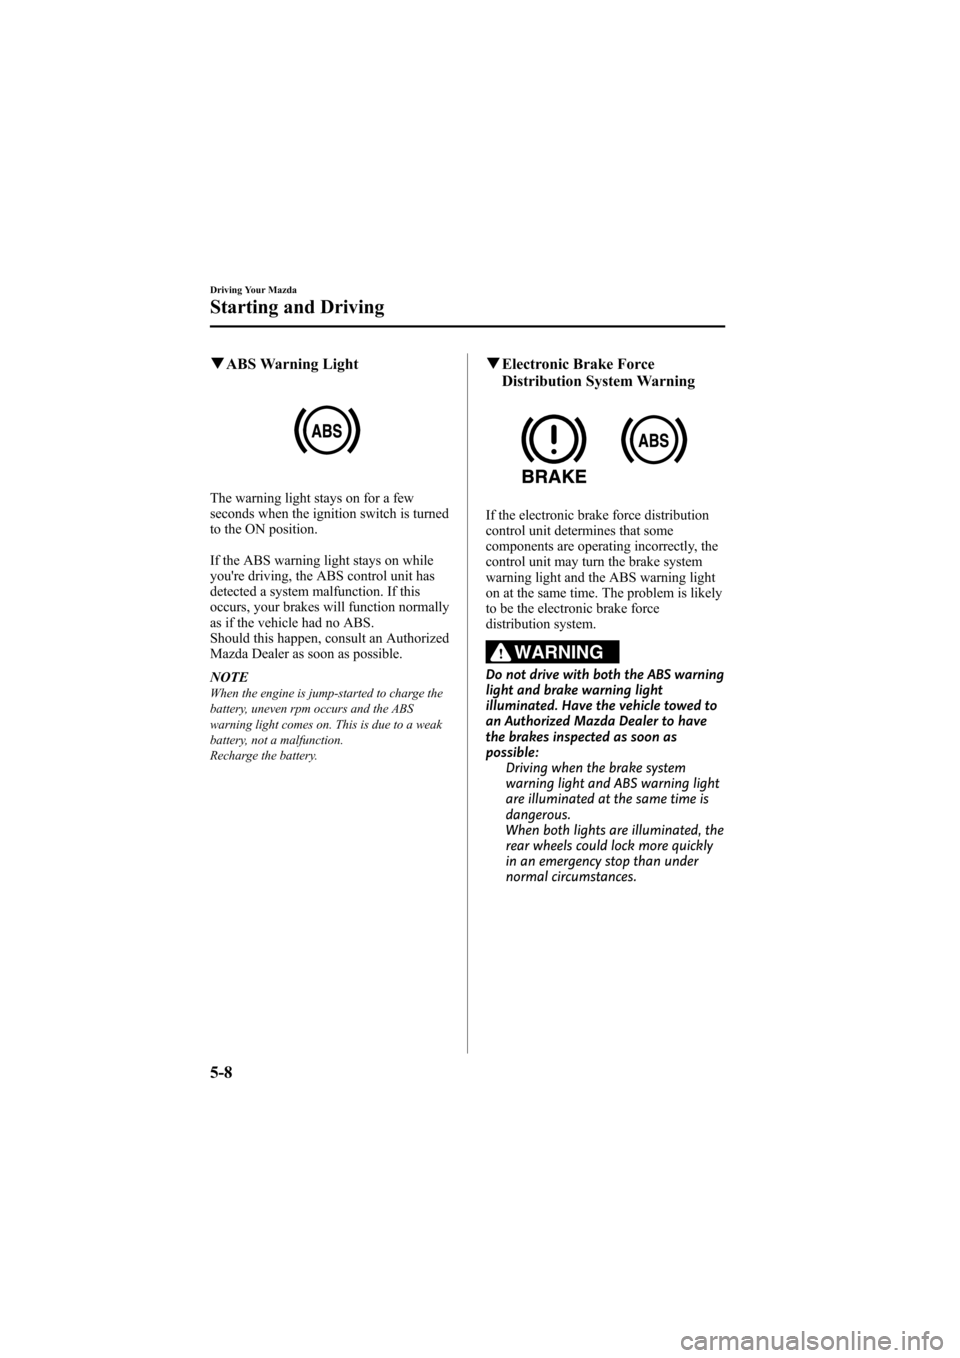 MAZDA MODEL 6 2008  Owners Manual (in English) Black plate (136,1)
qABS Warning Light
The warning light stays on for a few
seconds when the ignition switch is turned
to the ON position.
If the ABS warning light stays on while
youre driving, the A